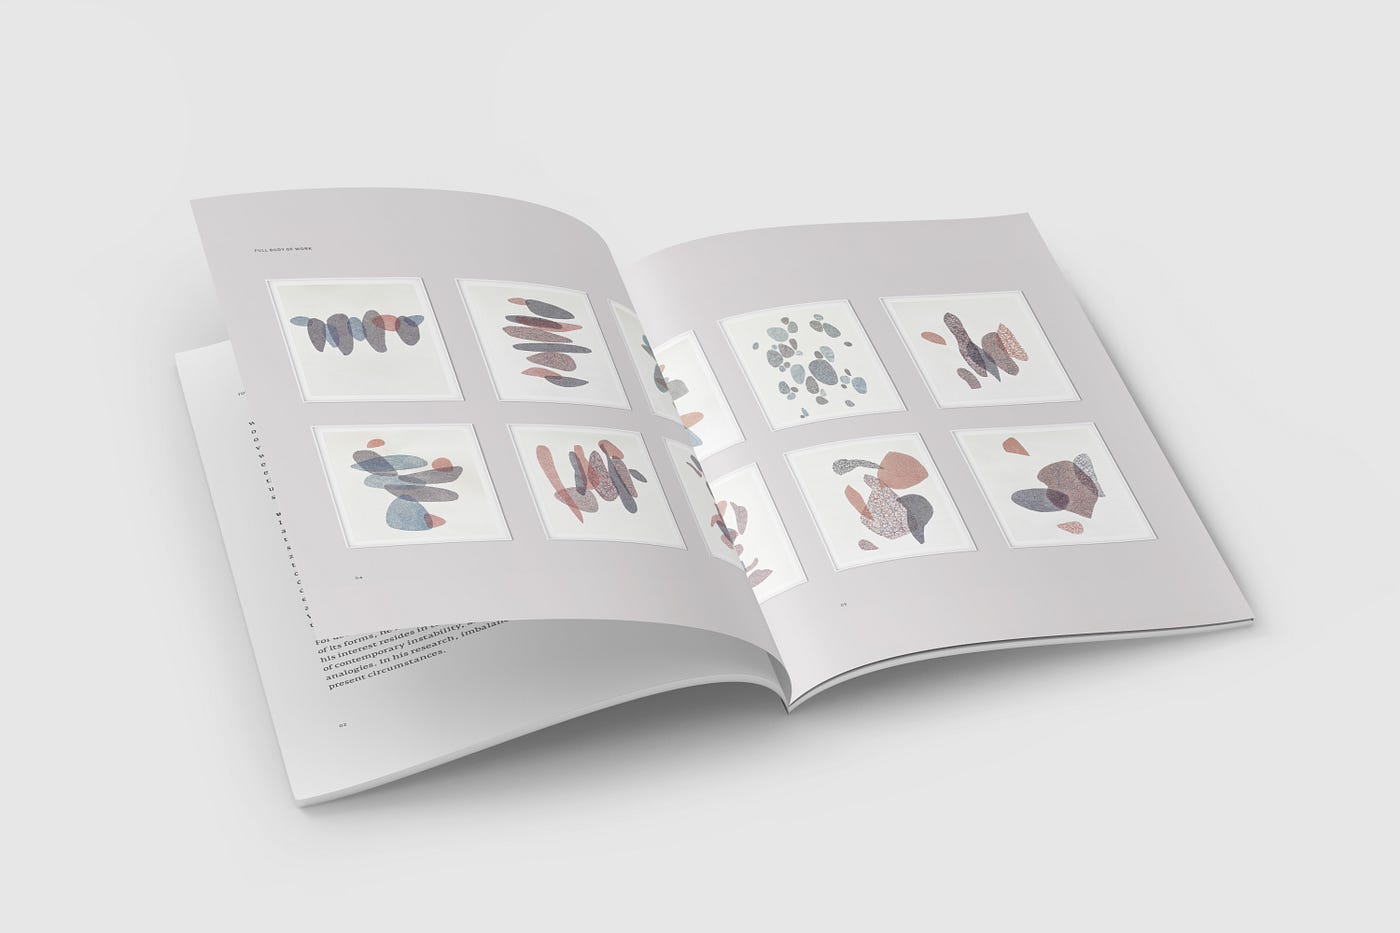 Interior book spread image featuring new series of ten drawings